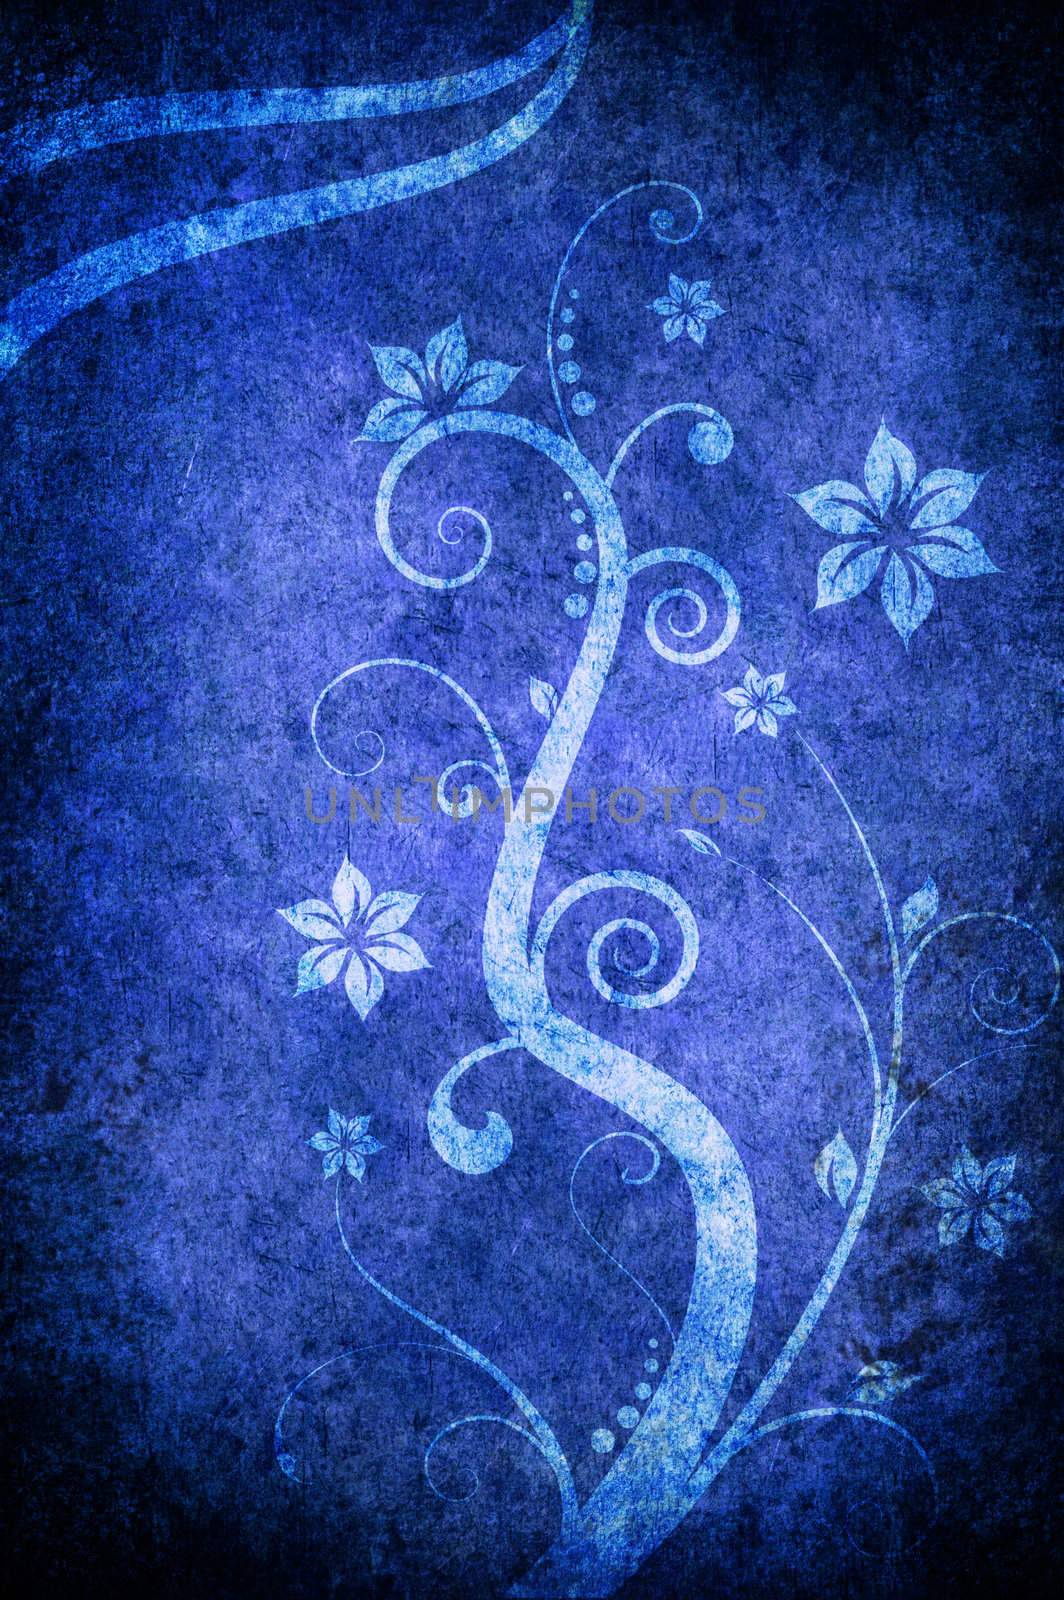 A blue texture with flowers and brach